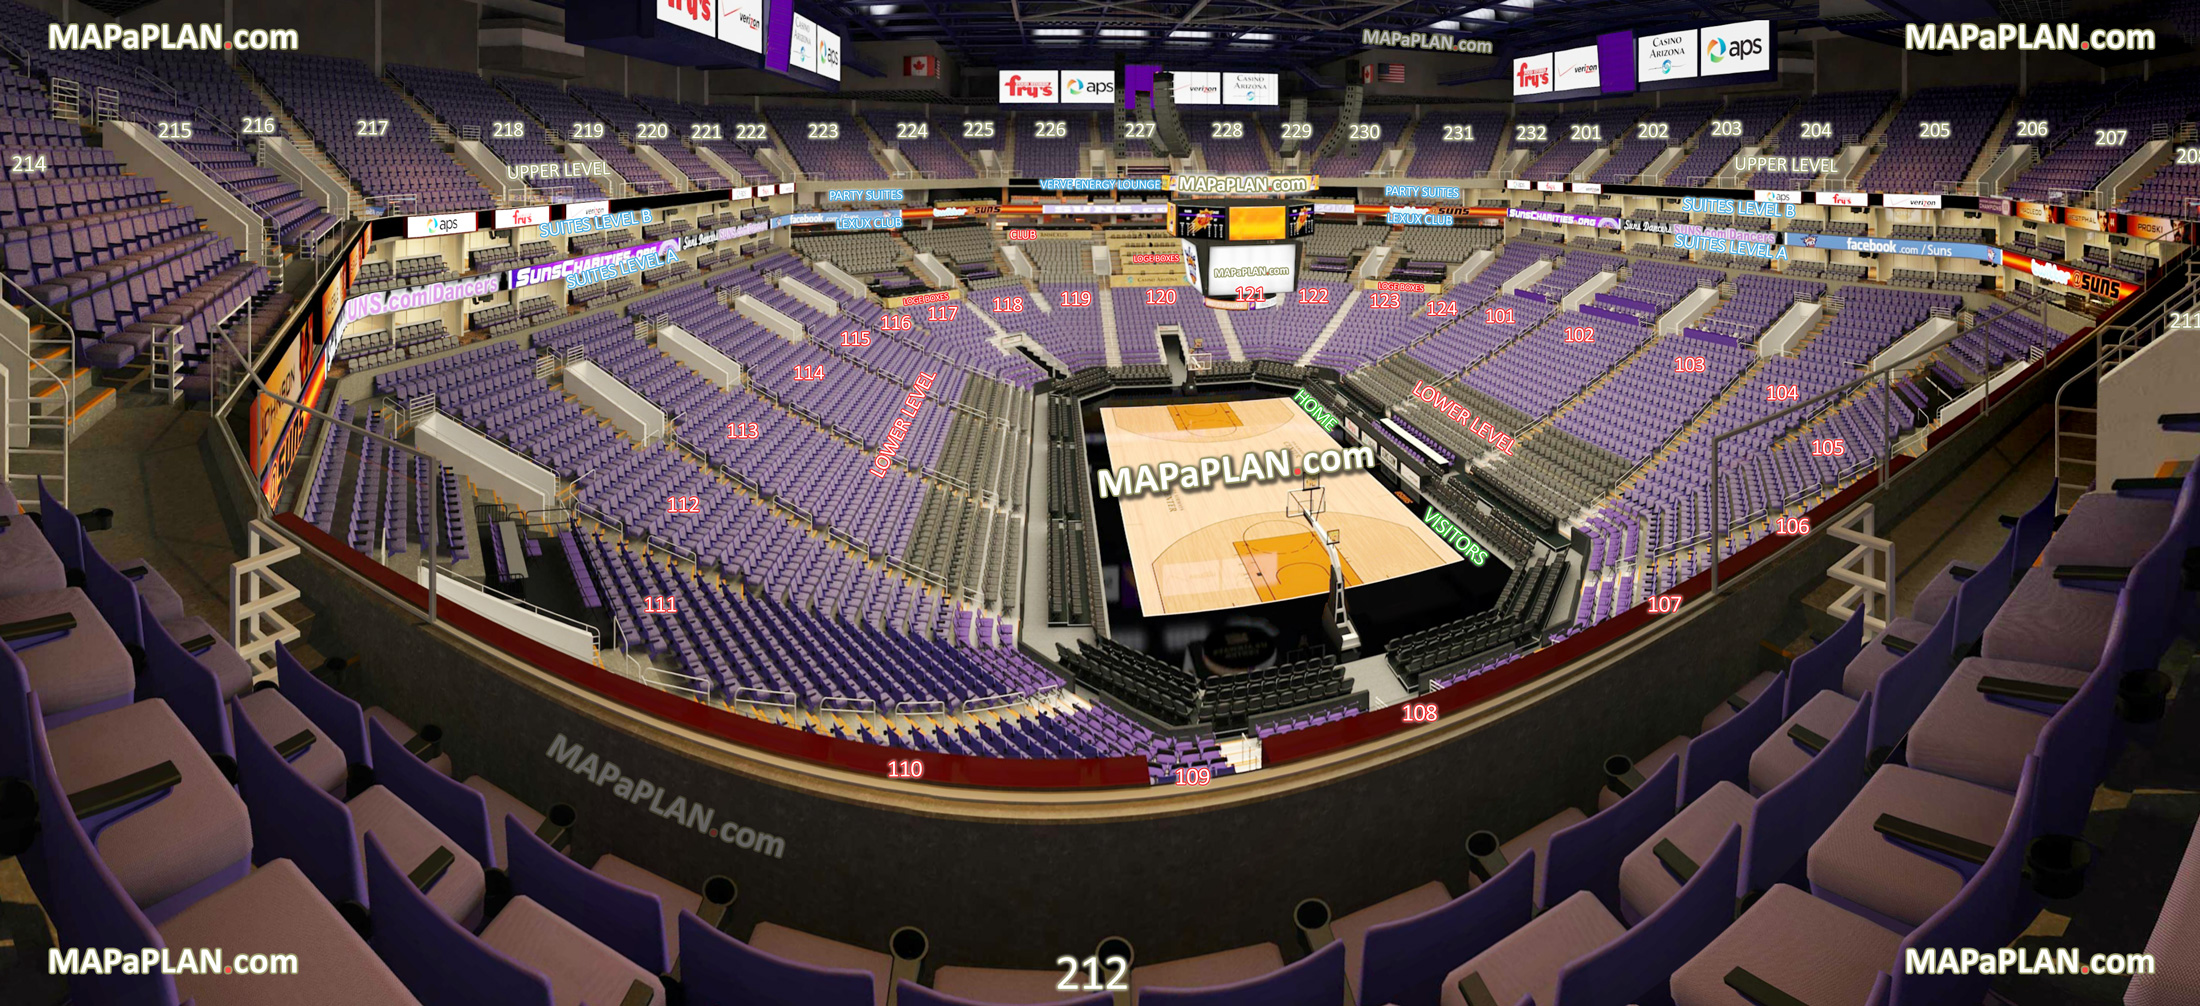 view section 212 row 4 seat 10 suns basketball game photo 100 lower 200 upper leval luxury premium vip suites zone Phoenix Talking Stick Resort Arena seating chart